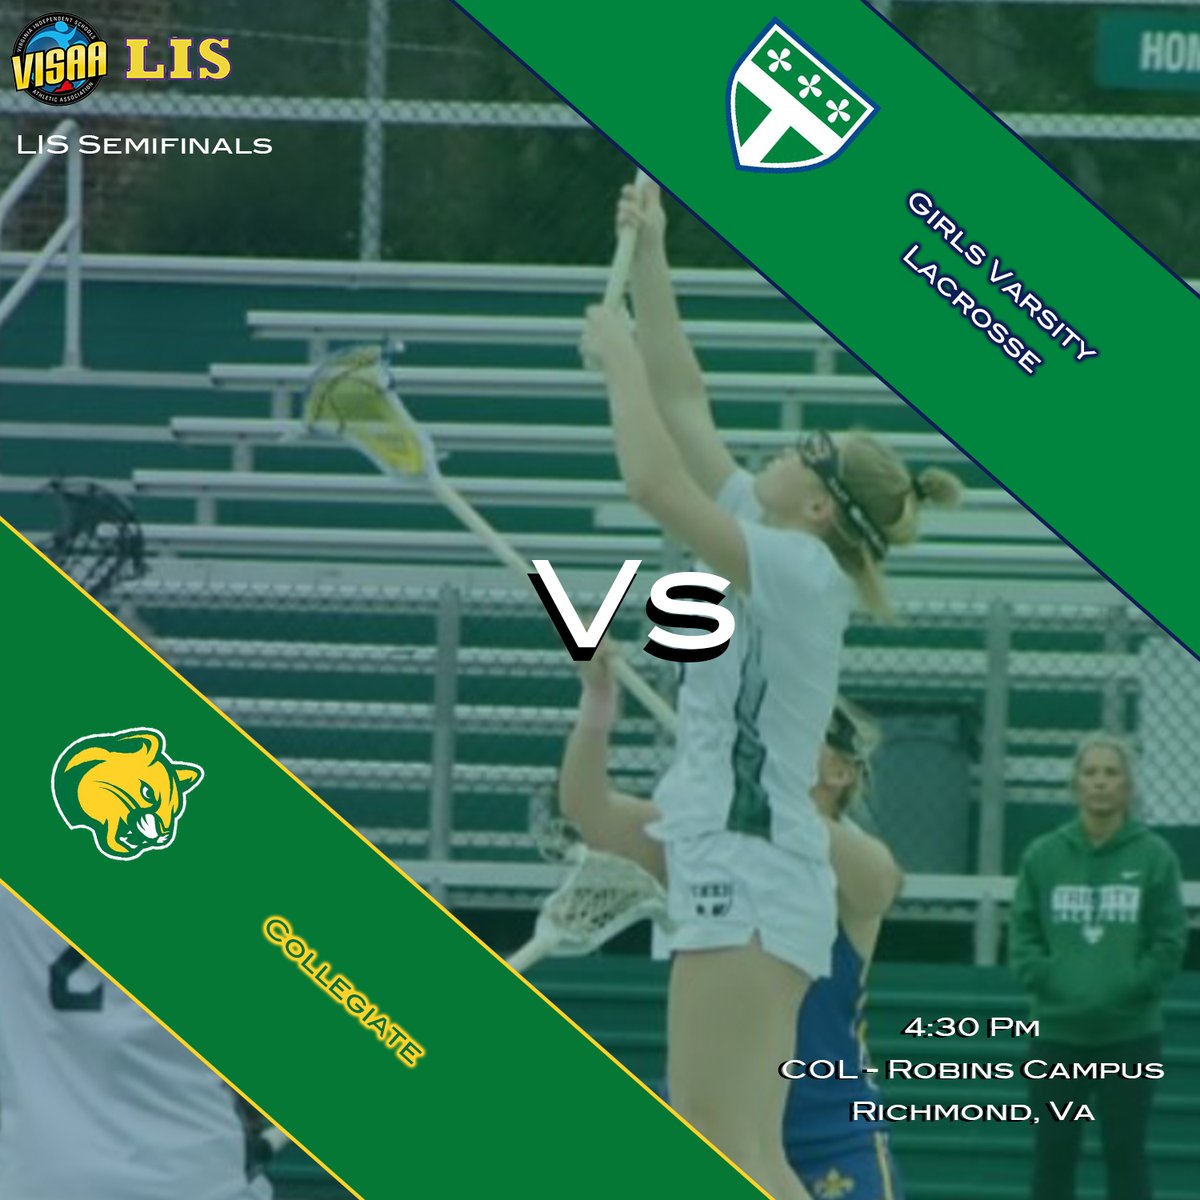 #7 (#3 LIS) Girls Lax to the LIS semifinals across the river as they take on #5 (#2 LIS) @CougarsRVA at the Robins campus. Wish them luck on the road! Let's Go Titans!